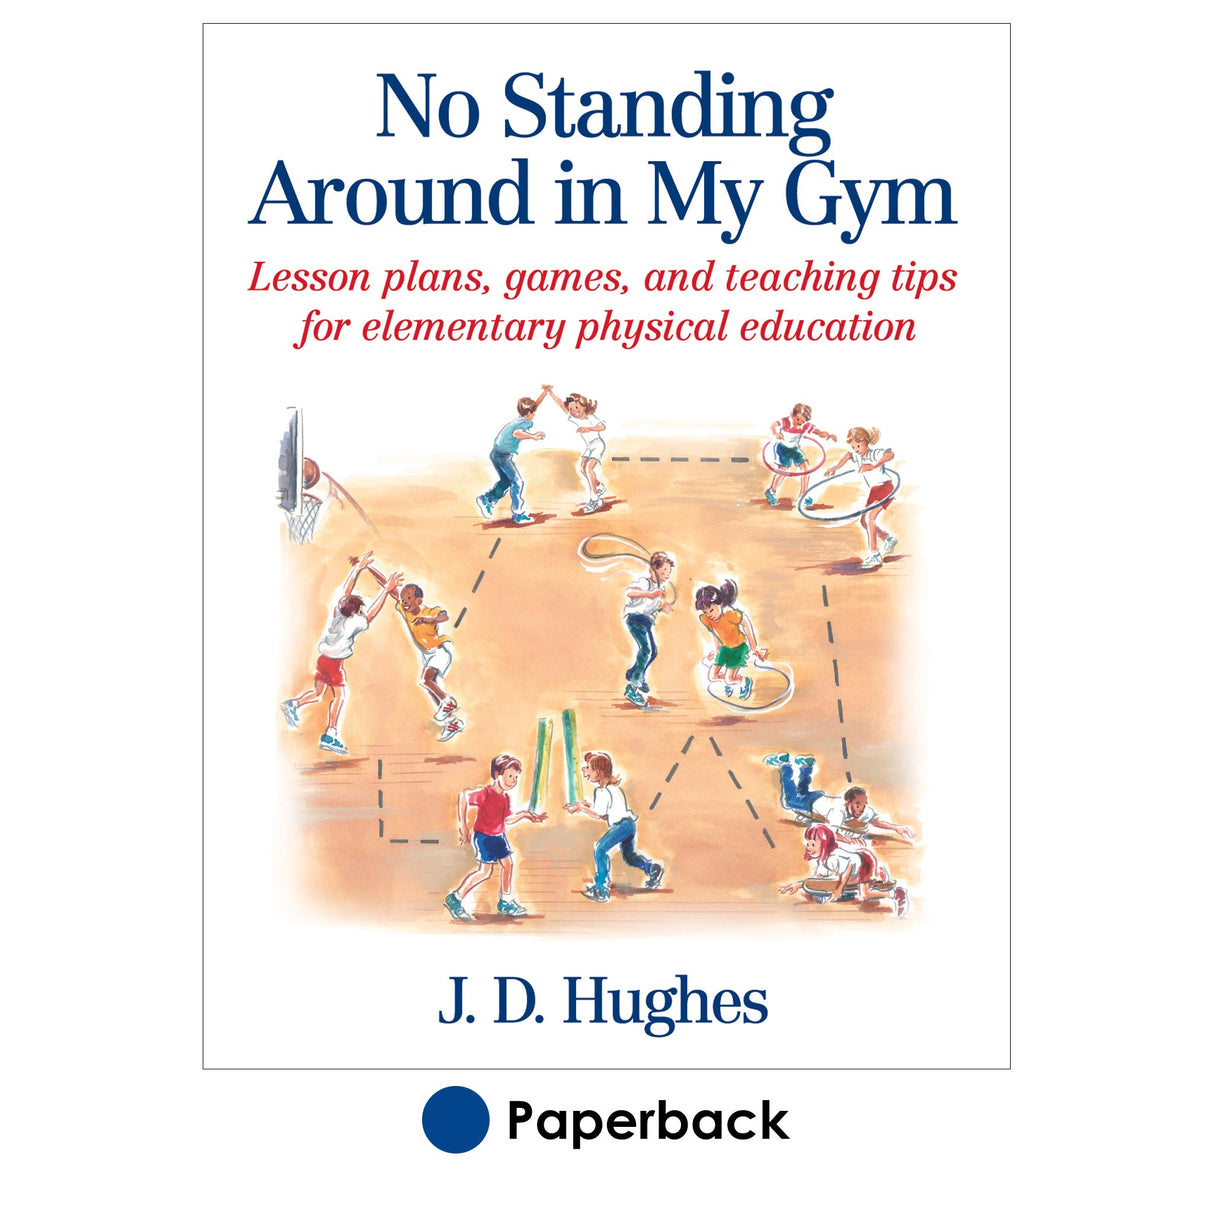 No Standing Around in My Gym